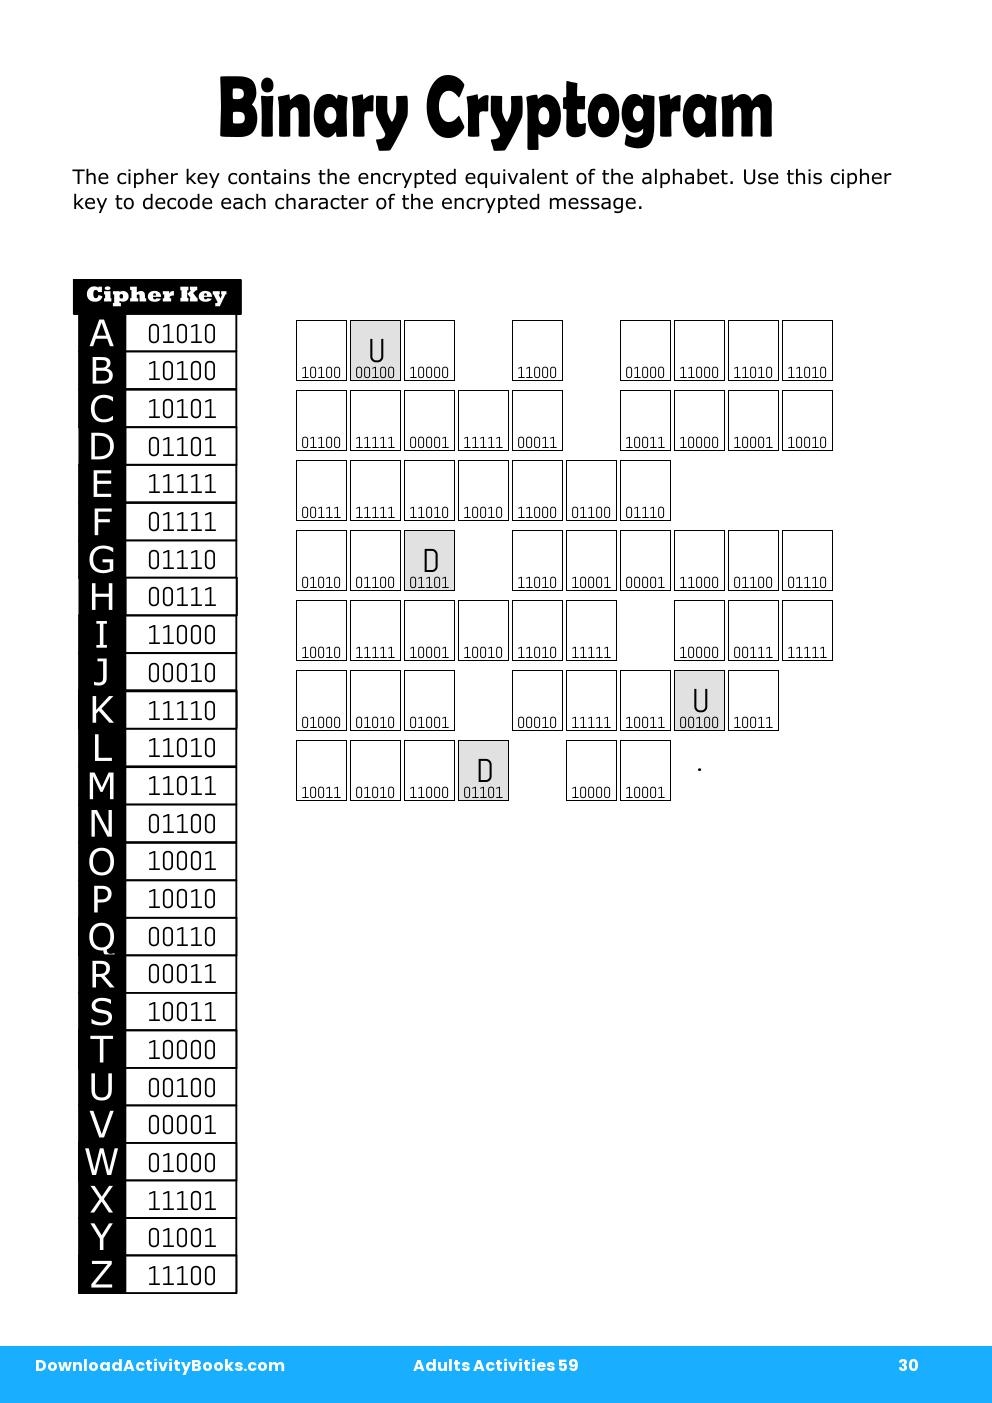 Binary Cryptogram in Adults Activities 59